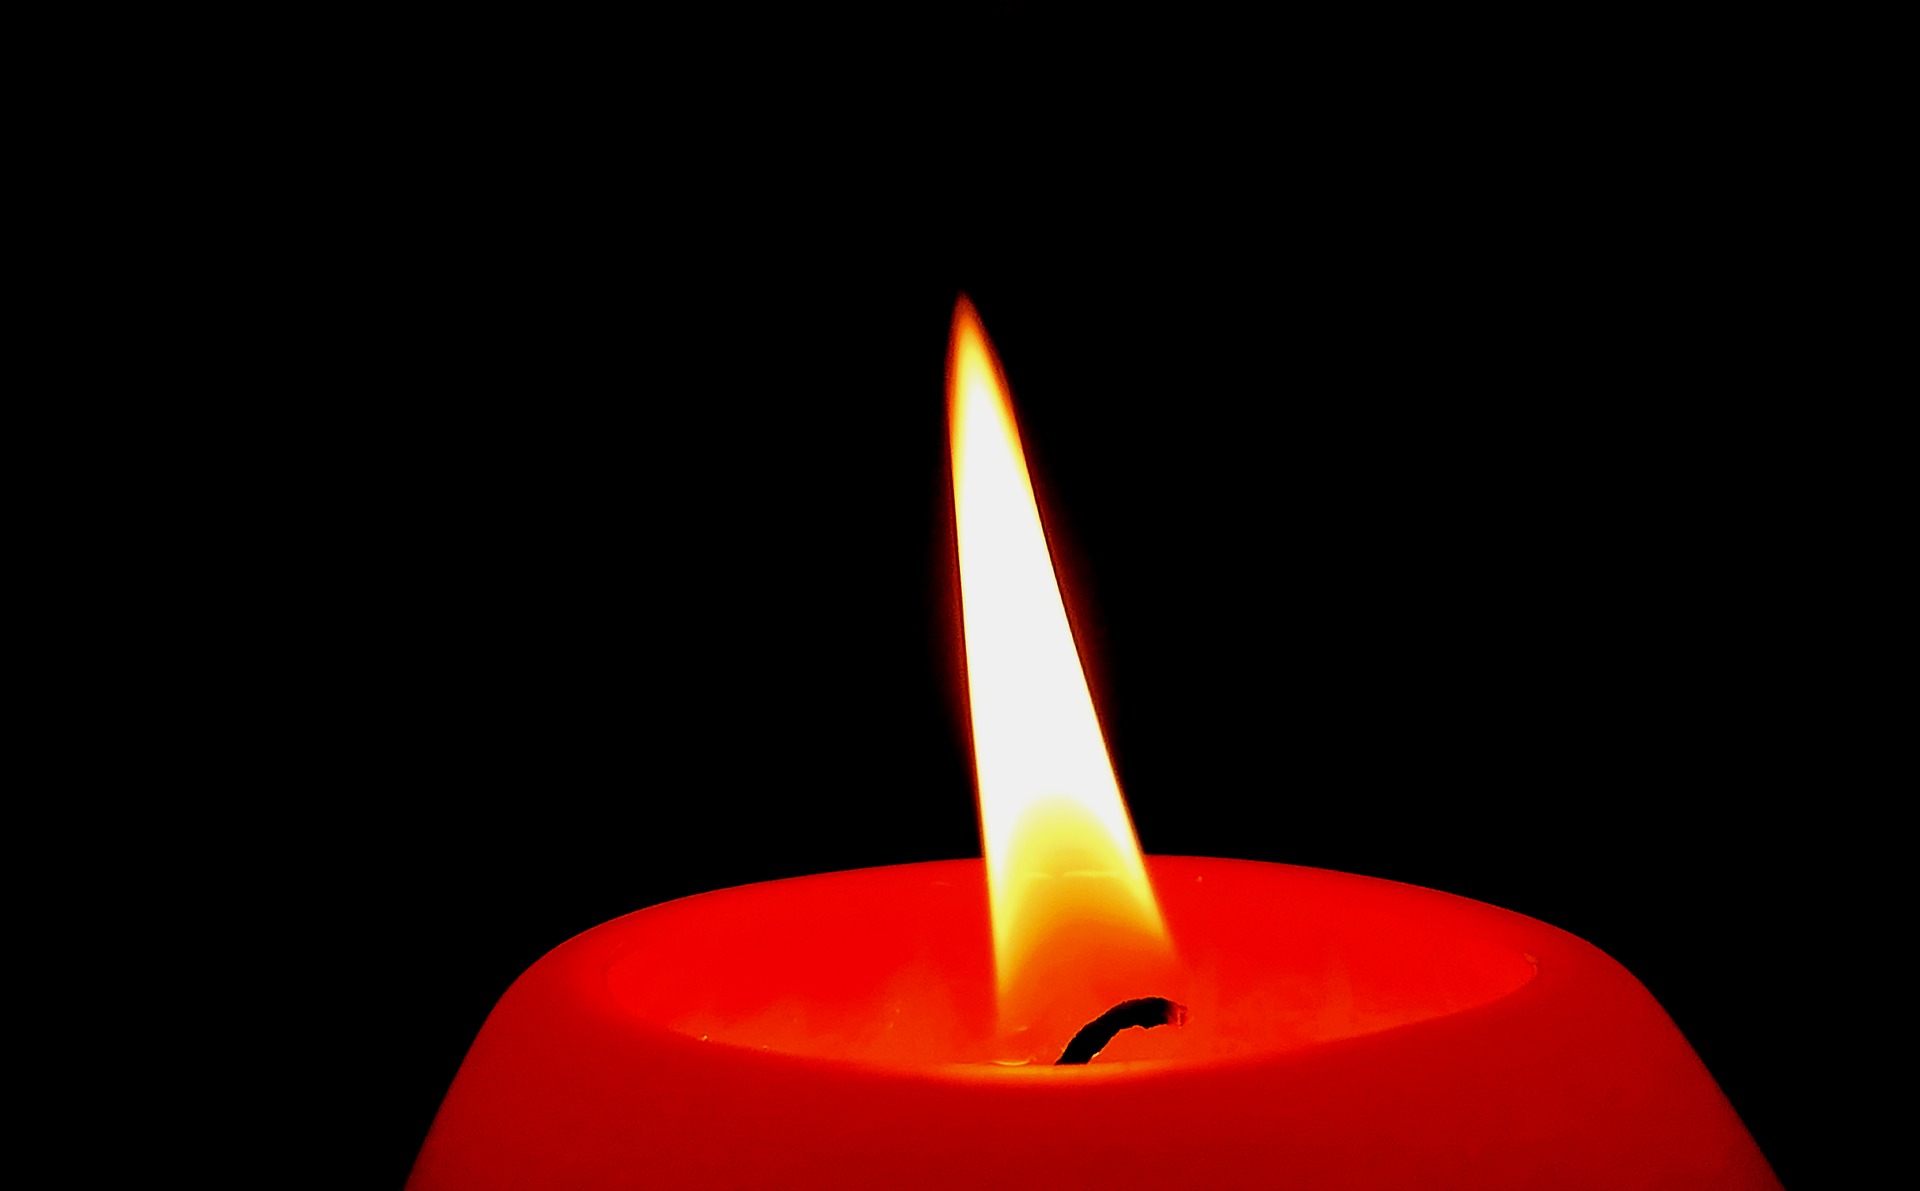 A picture of a candle burning